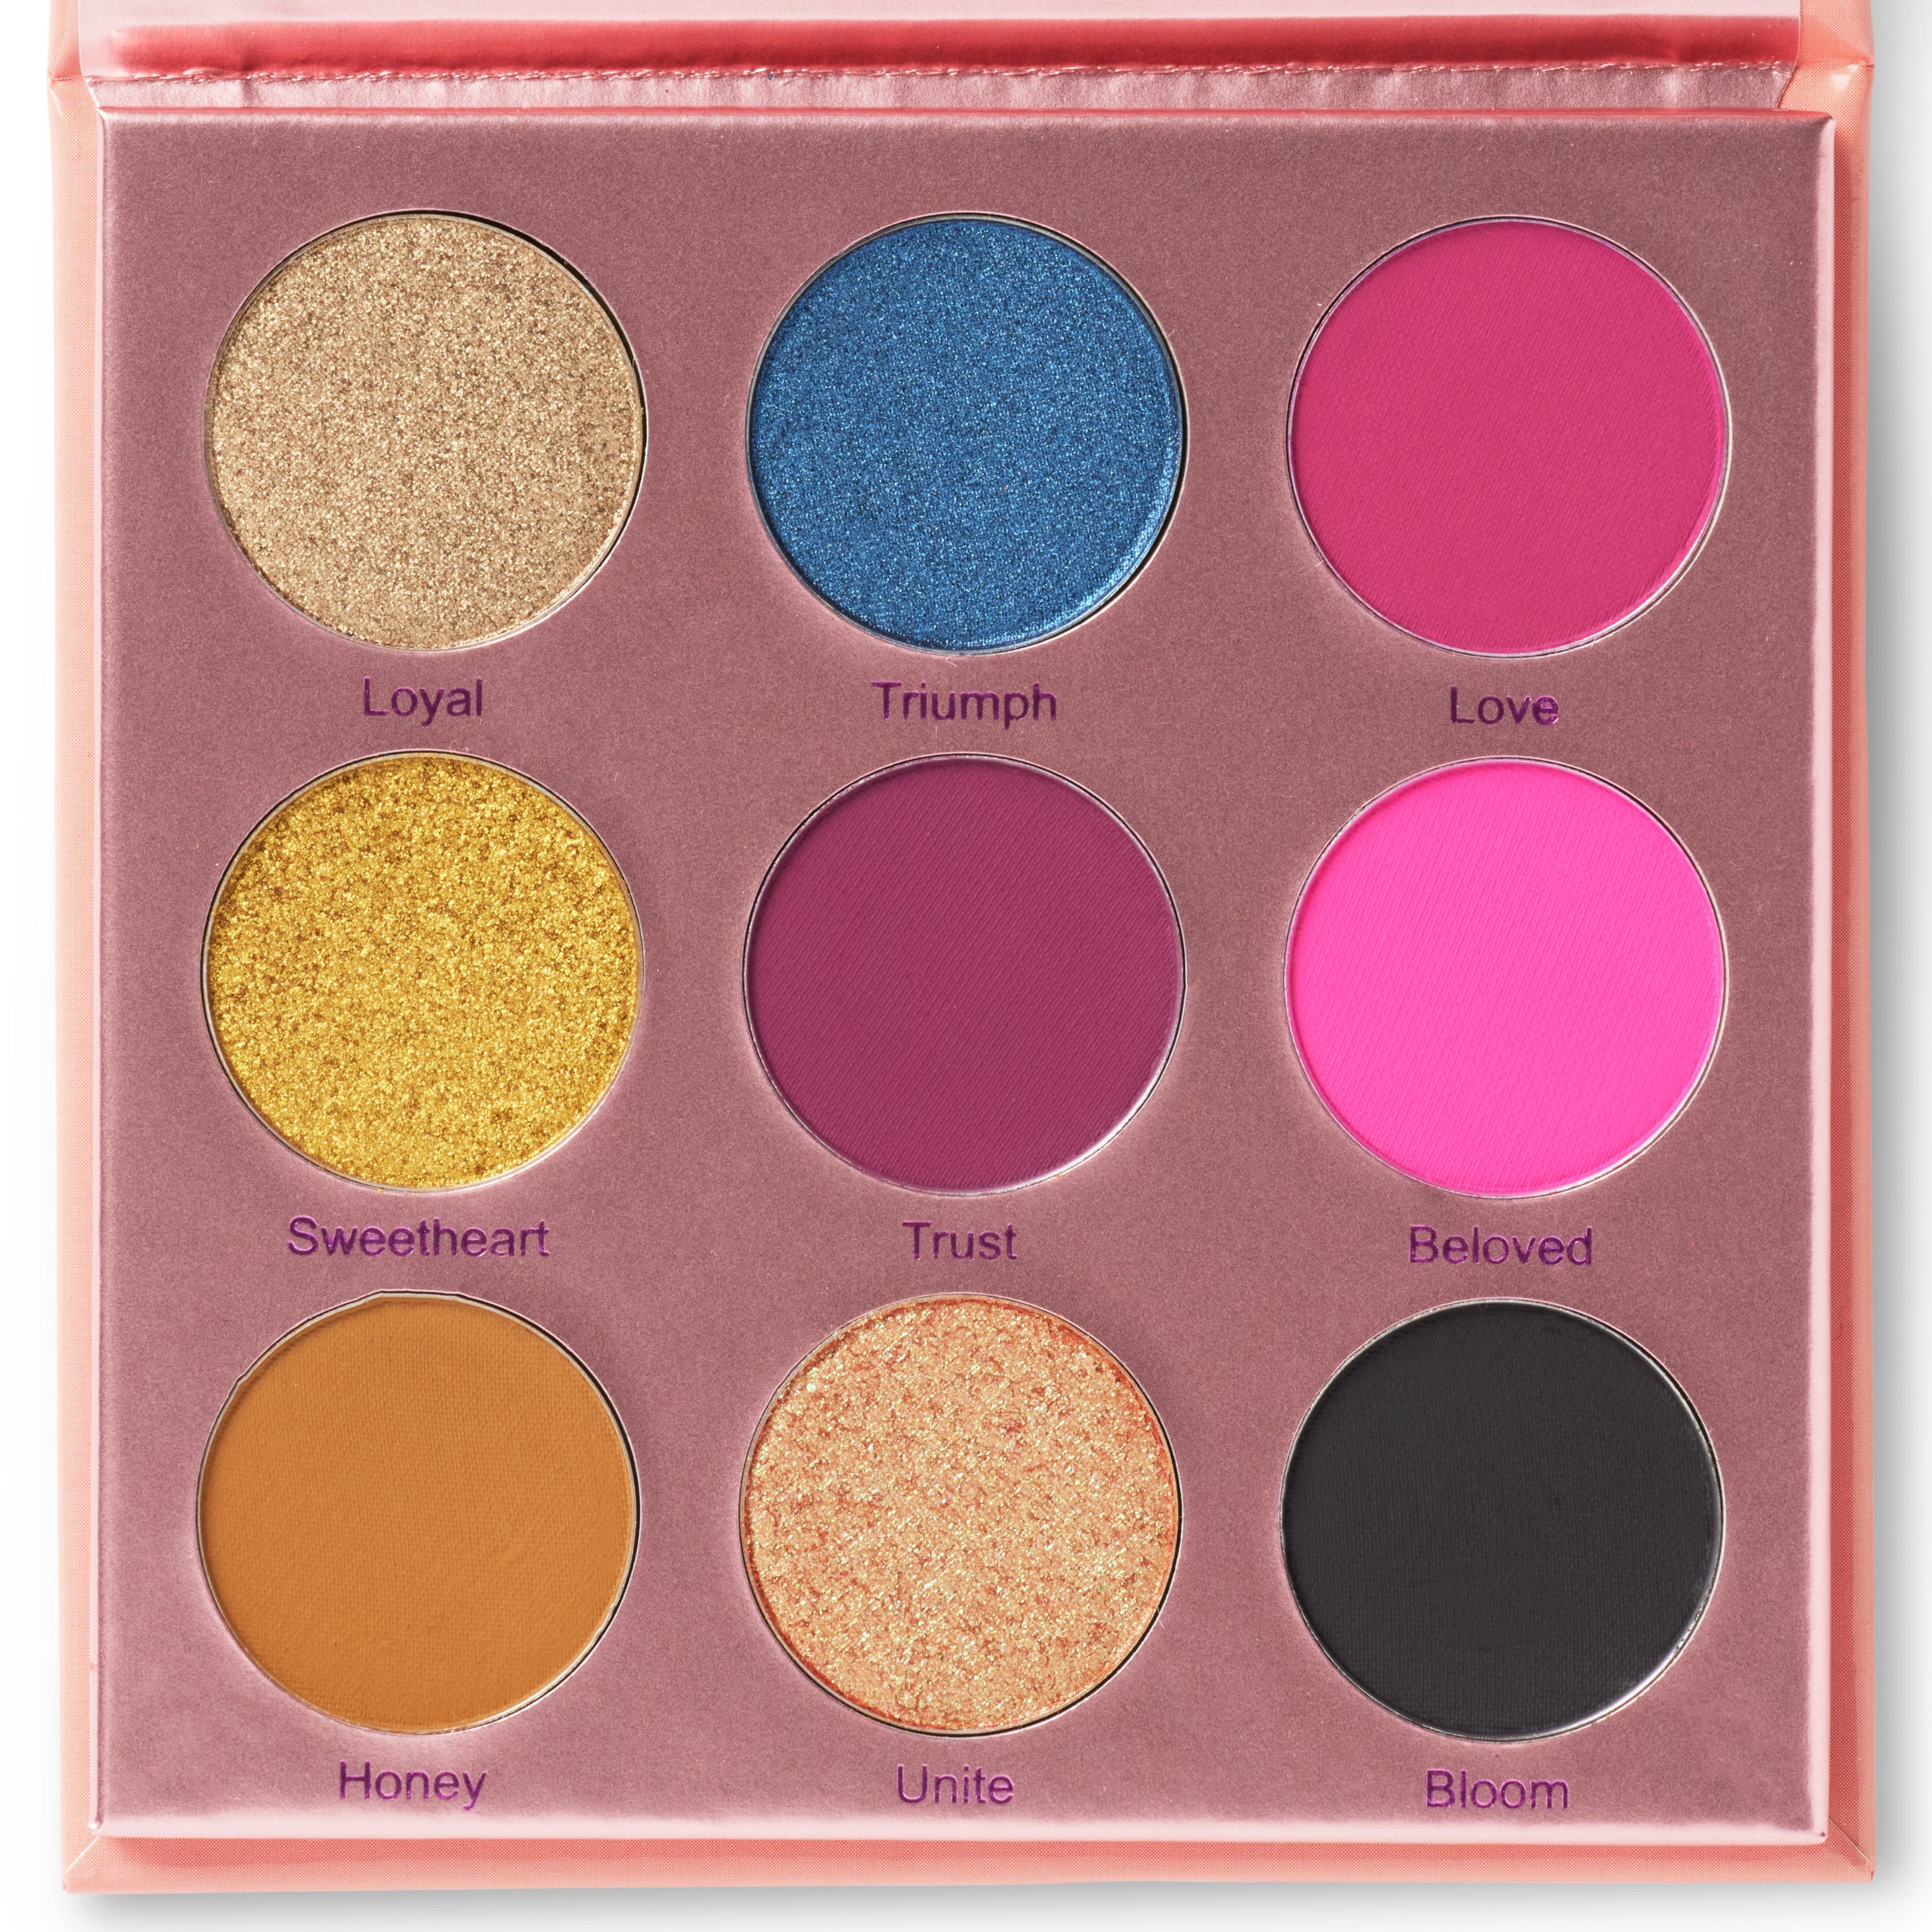 Face Artes Beauty LLC Original Logo Eyeshadow Palette Bold Colorful Neutral Highly Pigmented